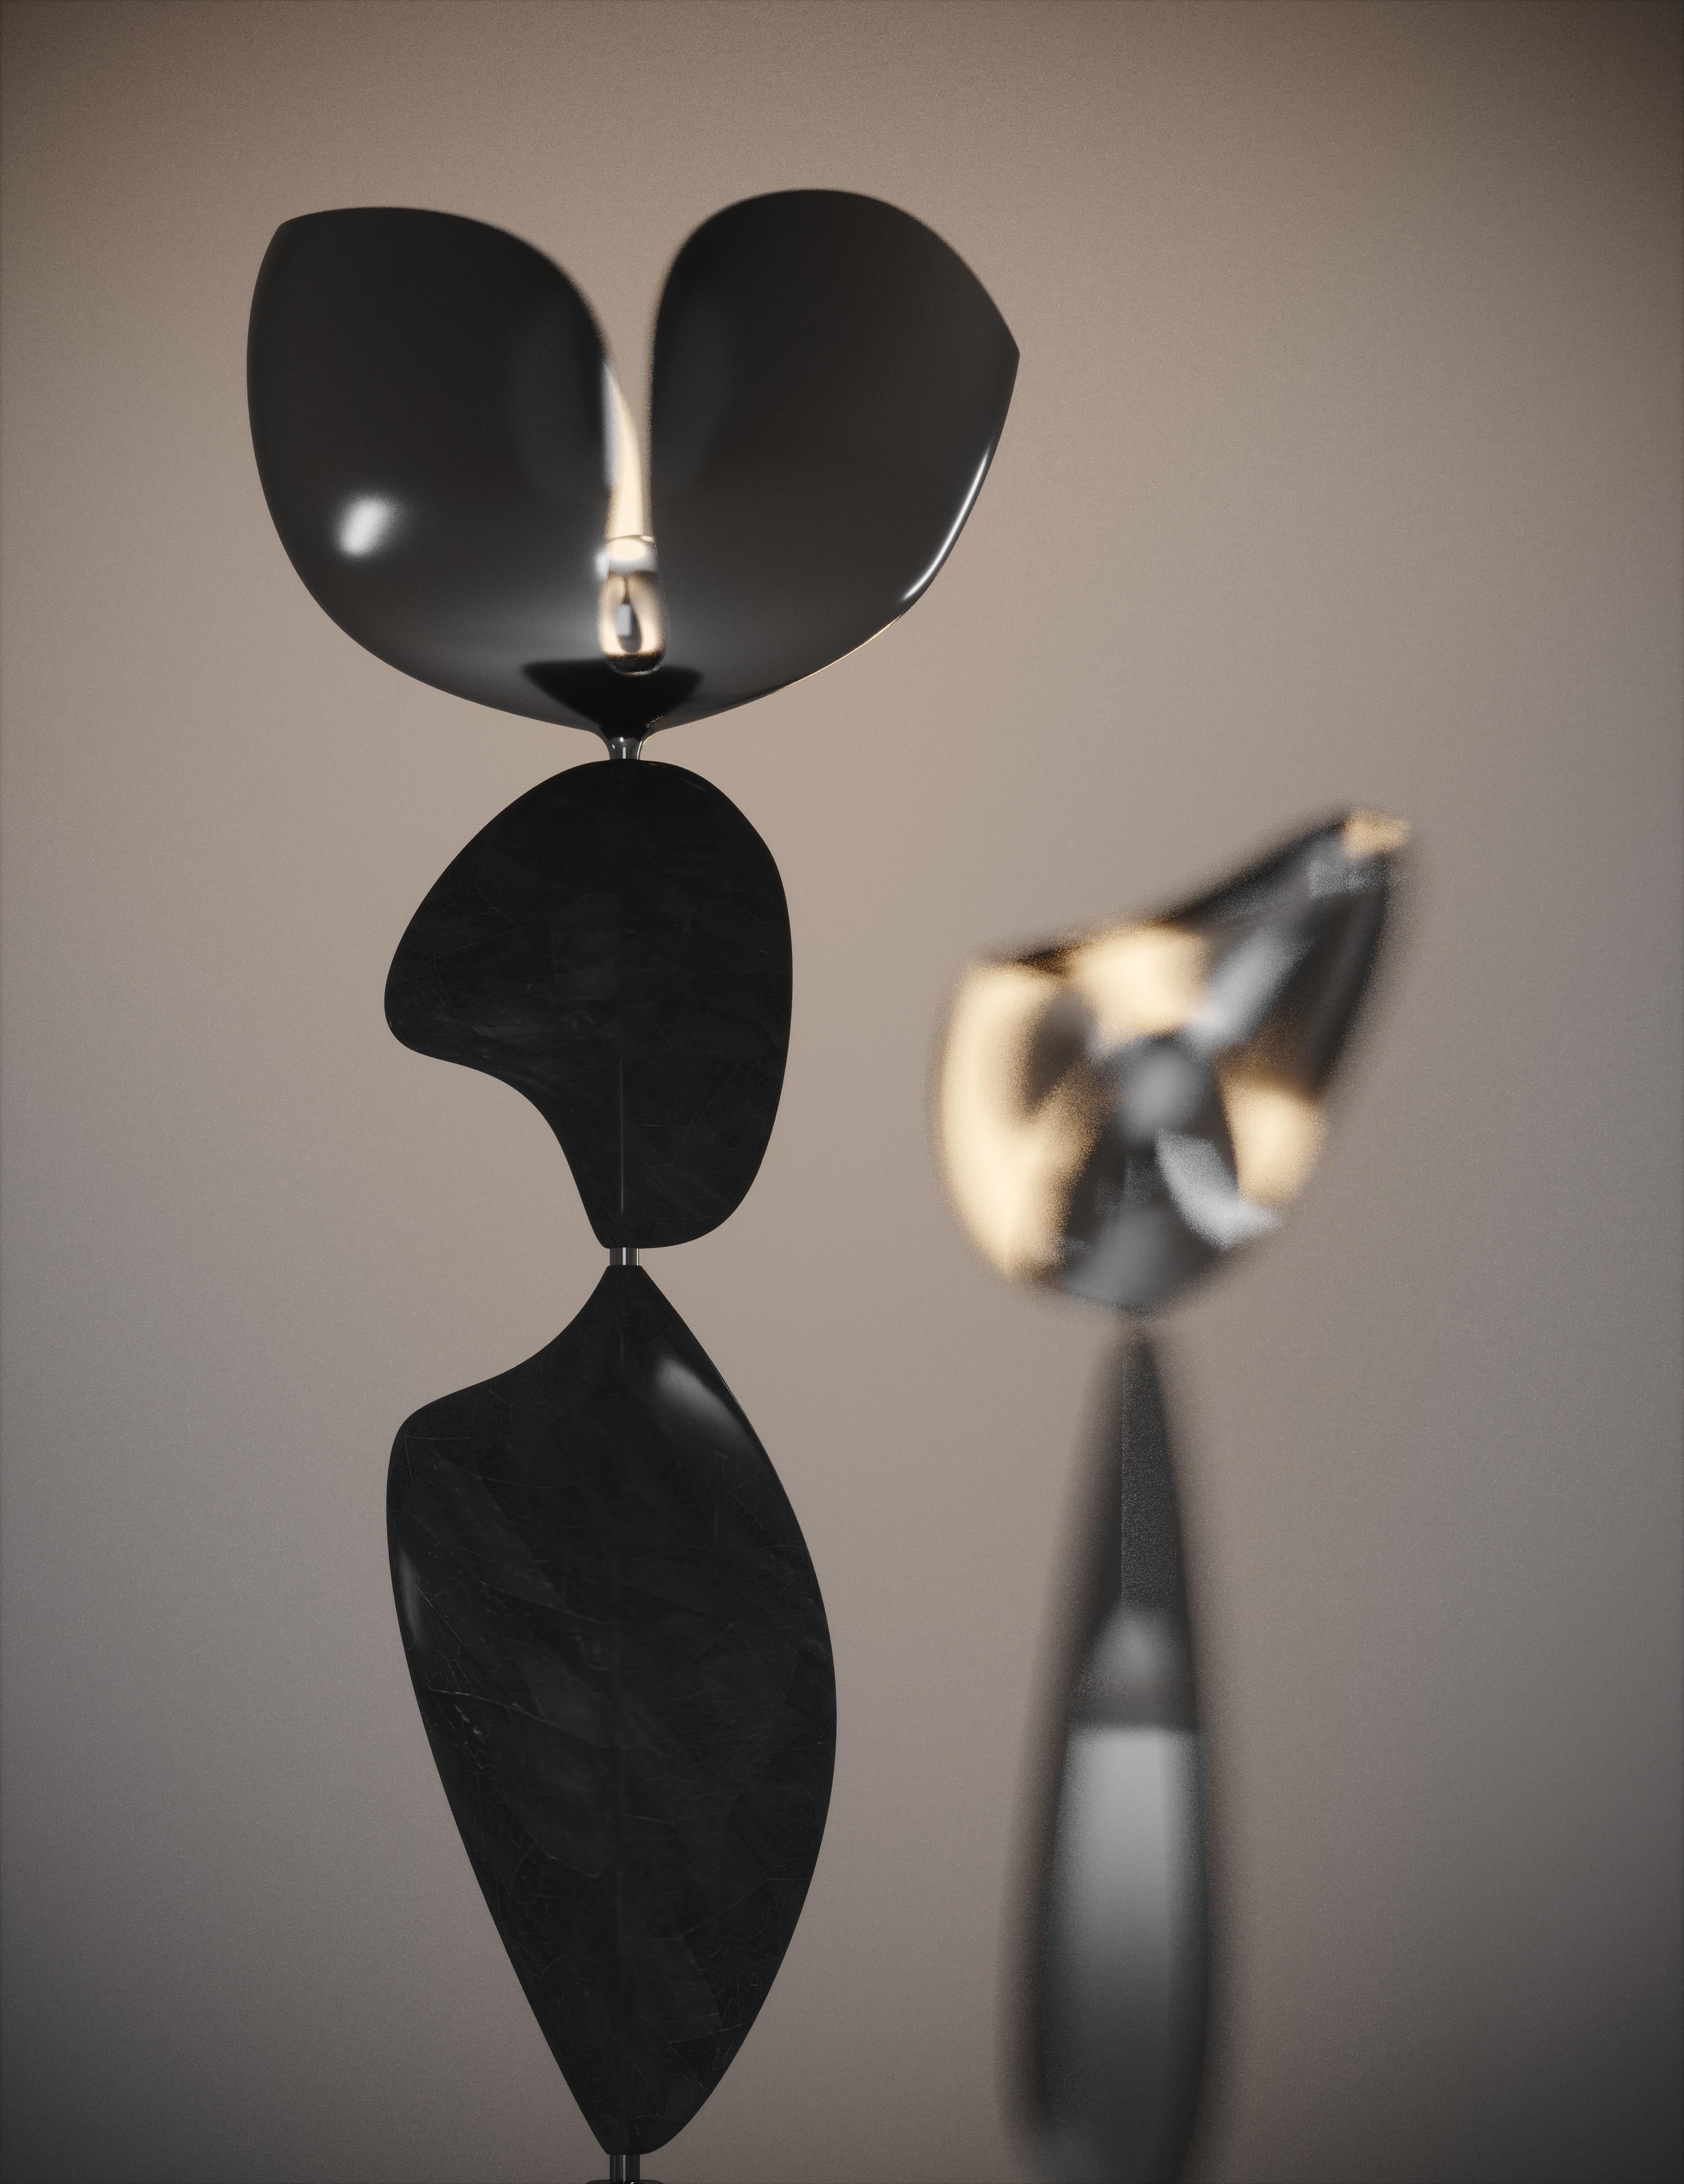 The Cosmo Sky floor lamp by Kifu Paris is a whimsical and sculptural piece, inlaid in a chrome finish polished stainless steel with black pen shell inlay; creating a vintage feel to the piece. The amorphous shapes are an abstract and poetic